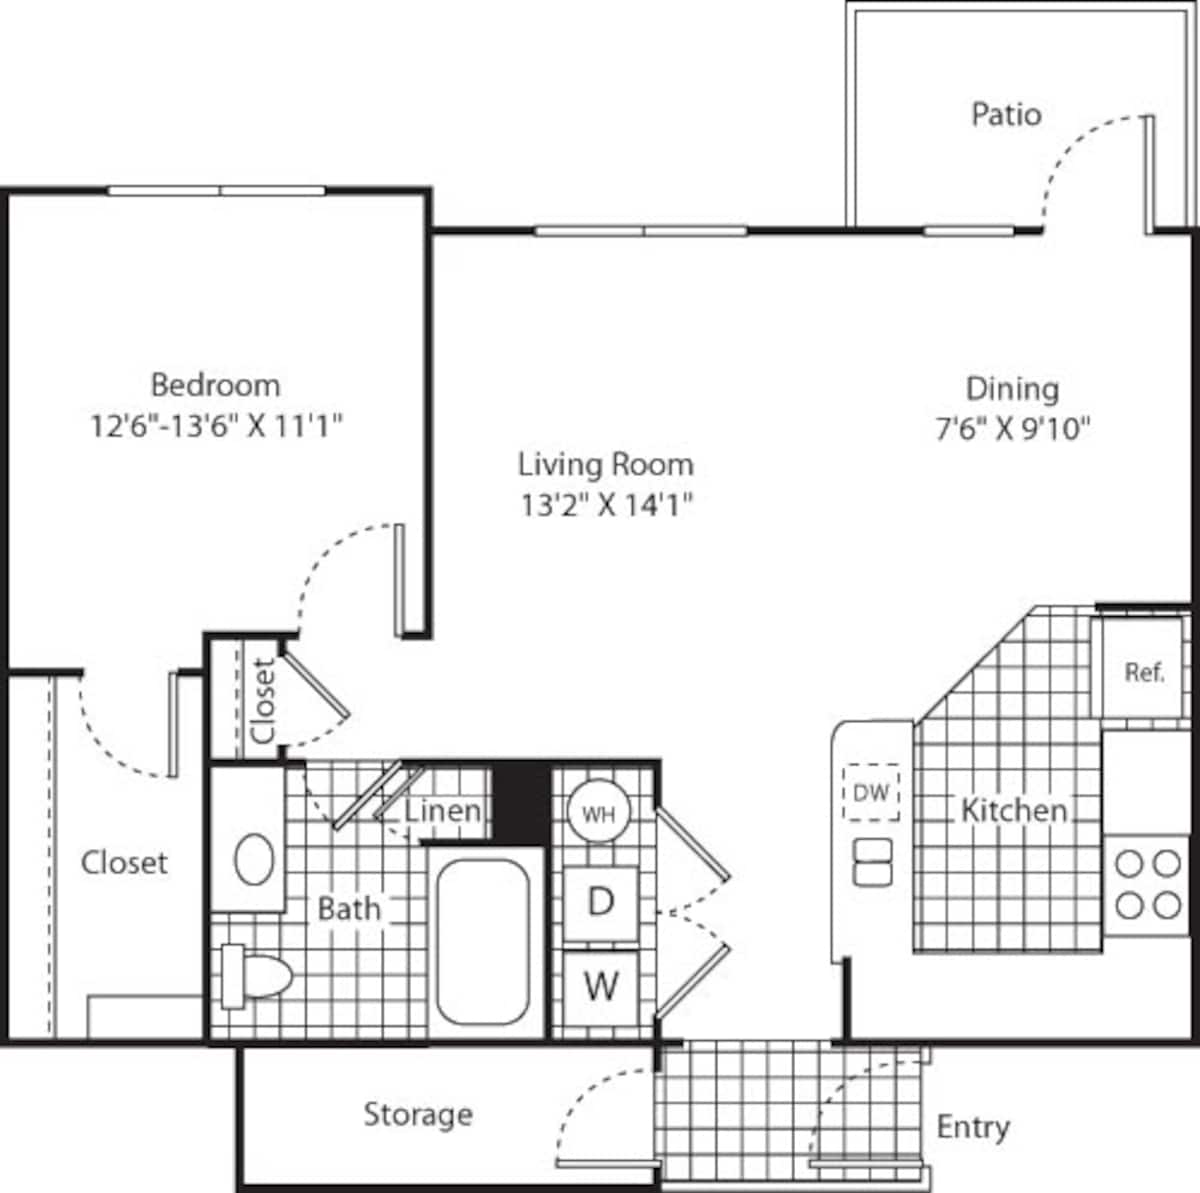 Floorplan diagram for One Bed A-4 - Phase II, showing 1 bedroom